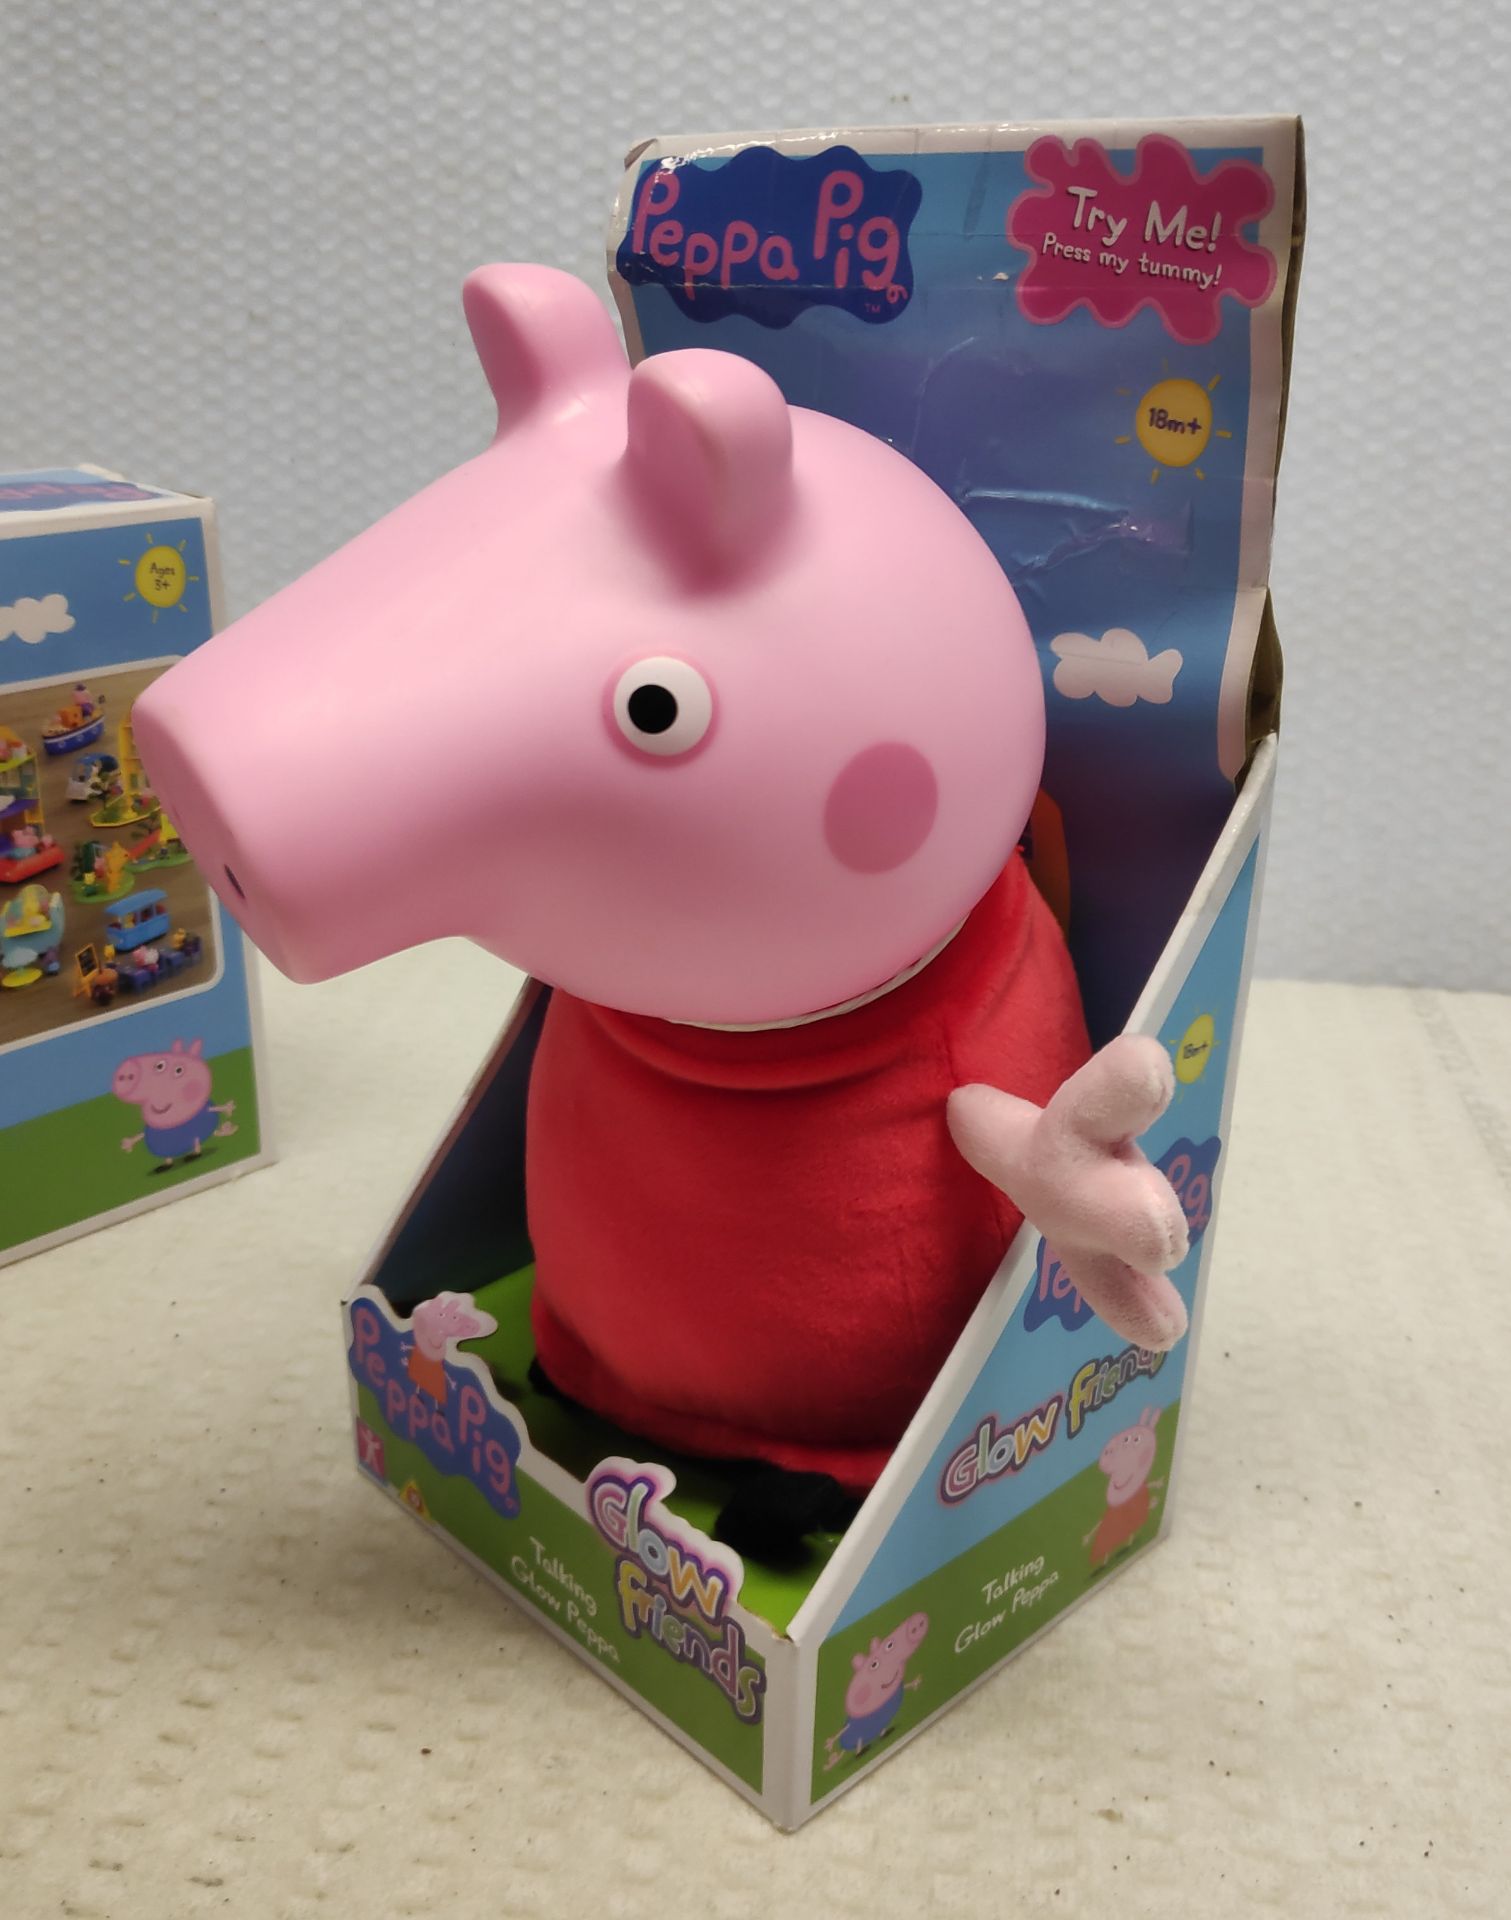 2 x Peppa Pig Toys - Glow Friends Peppa and Air Peppa Jet - New/Boxed - Image 6 of 7